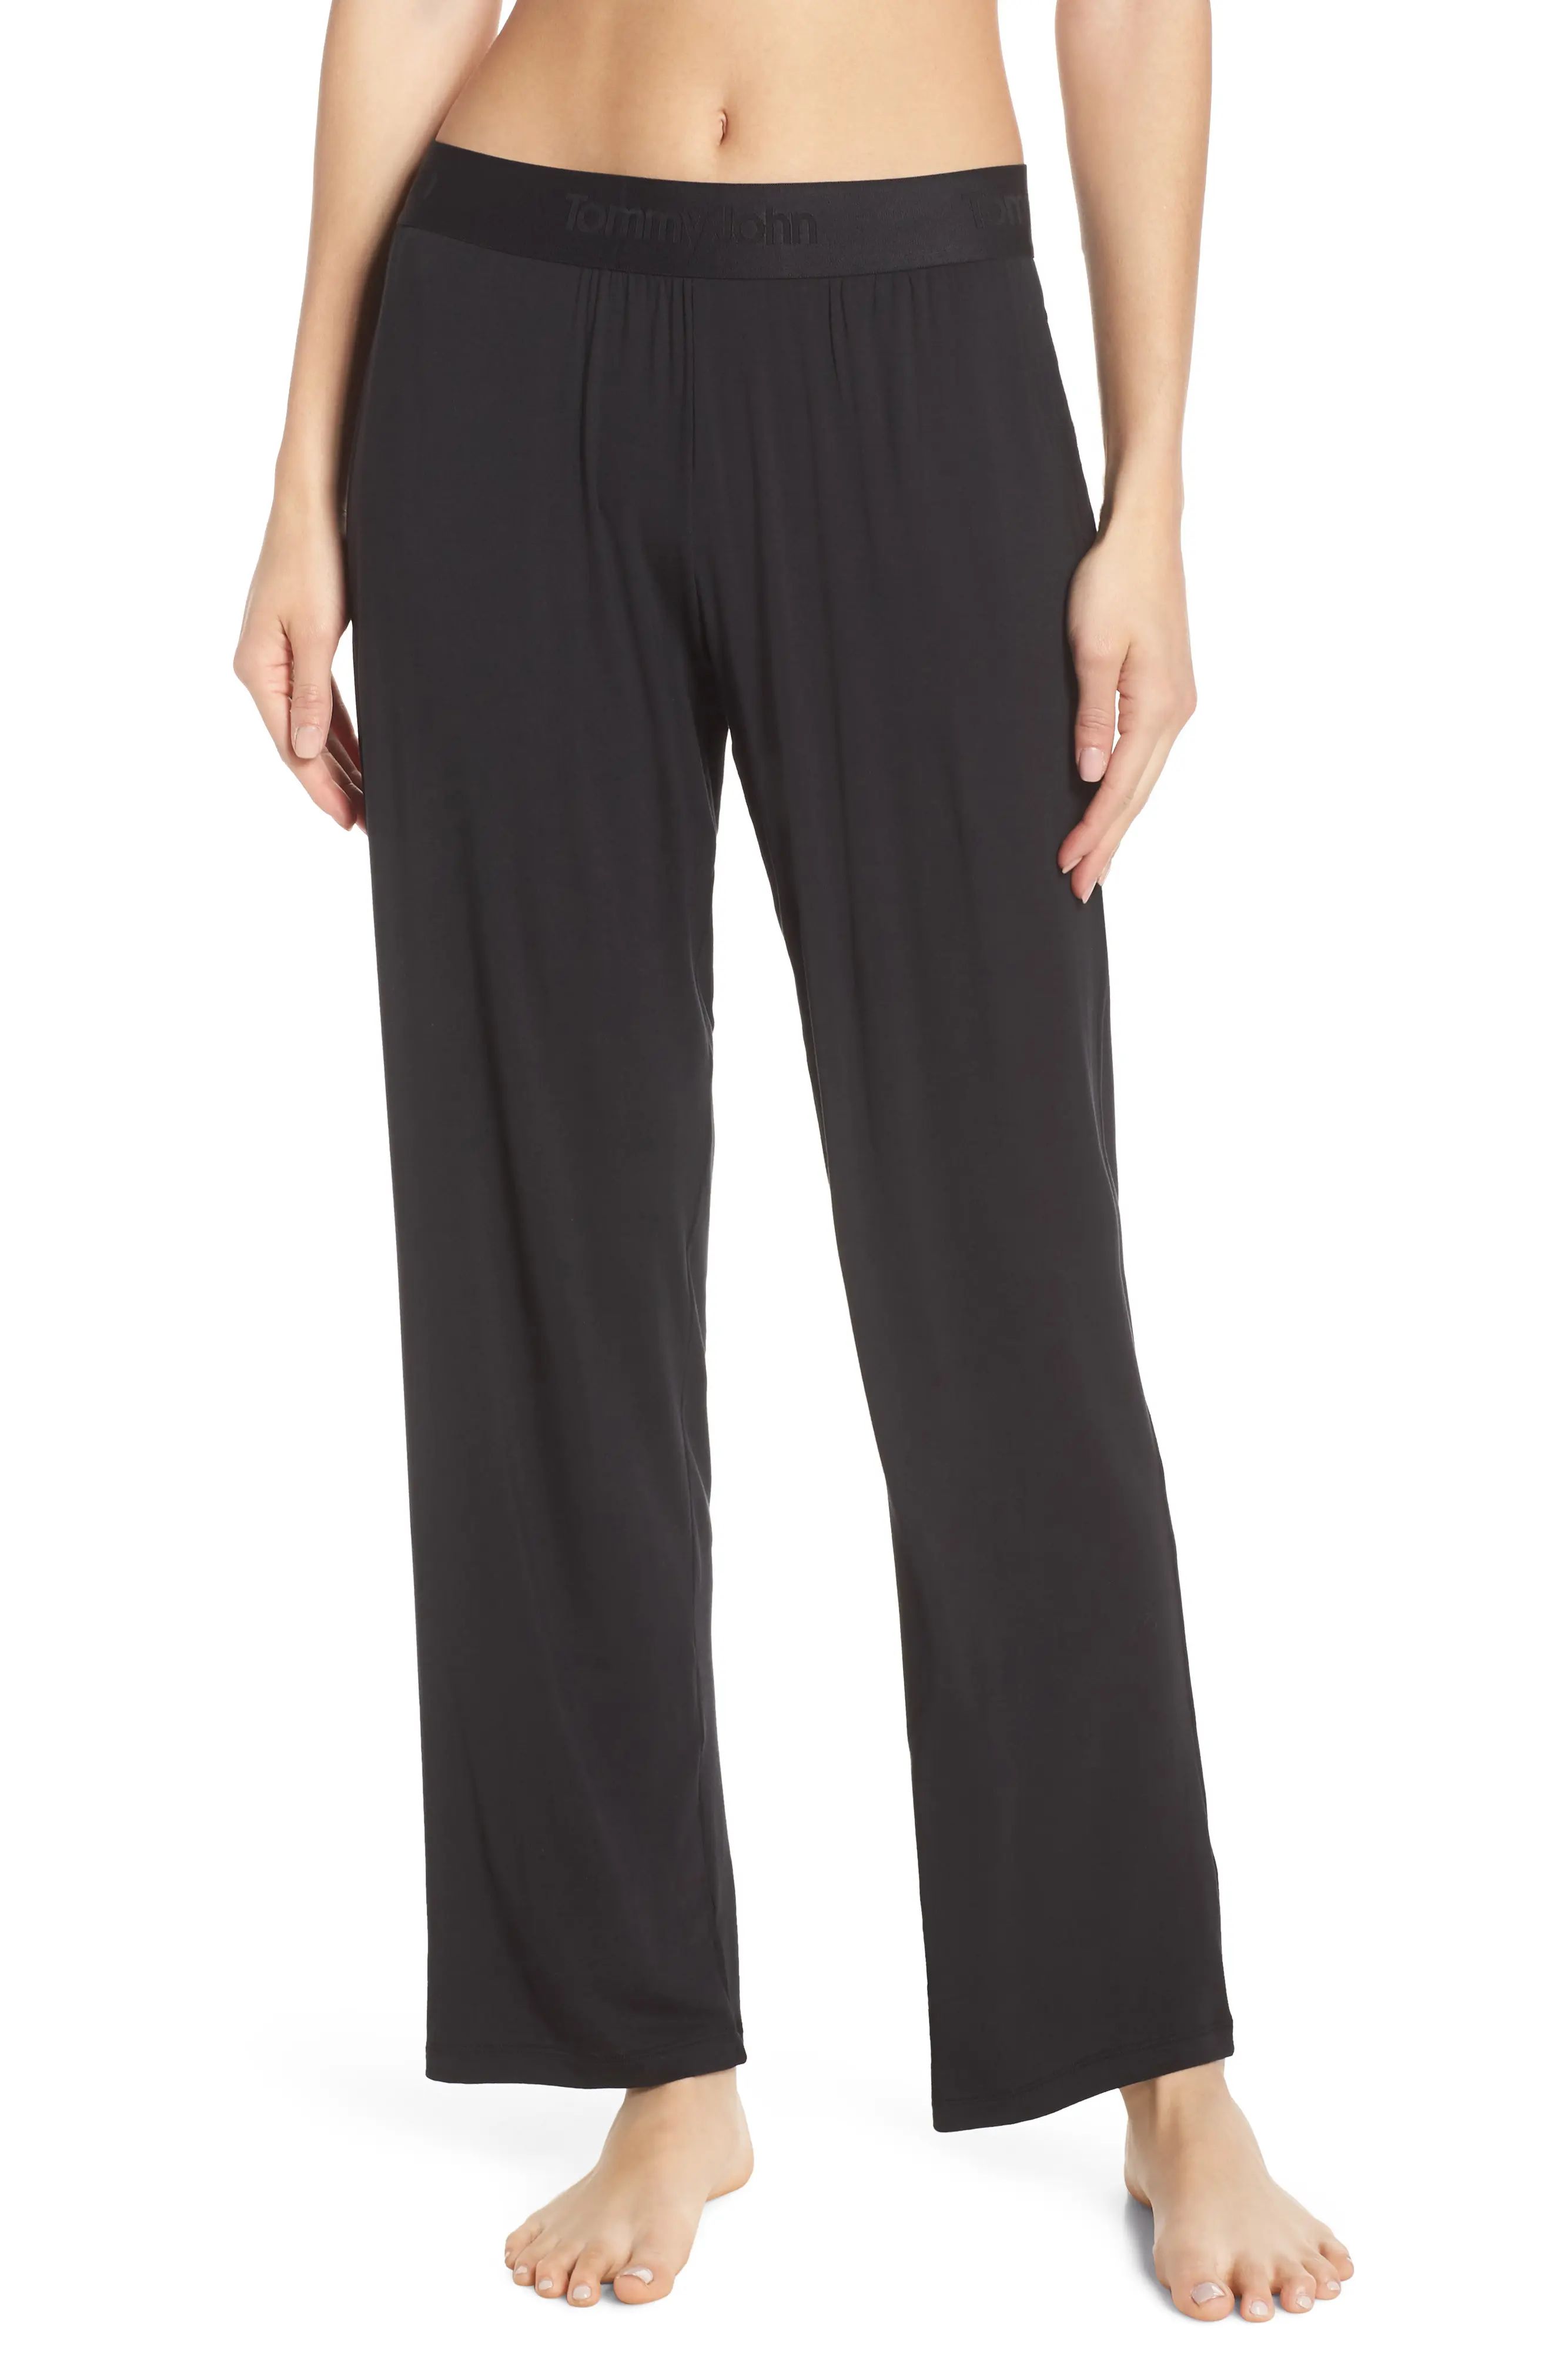 Tommy John Second Skin Lounge Pants in Black at Nordstrom, Size Xx-Large | Nordstrom